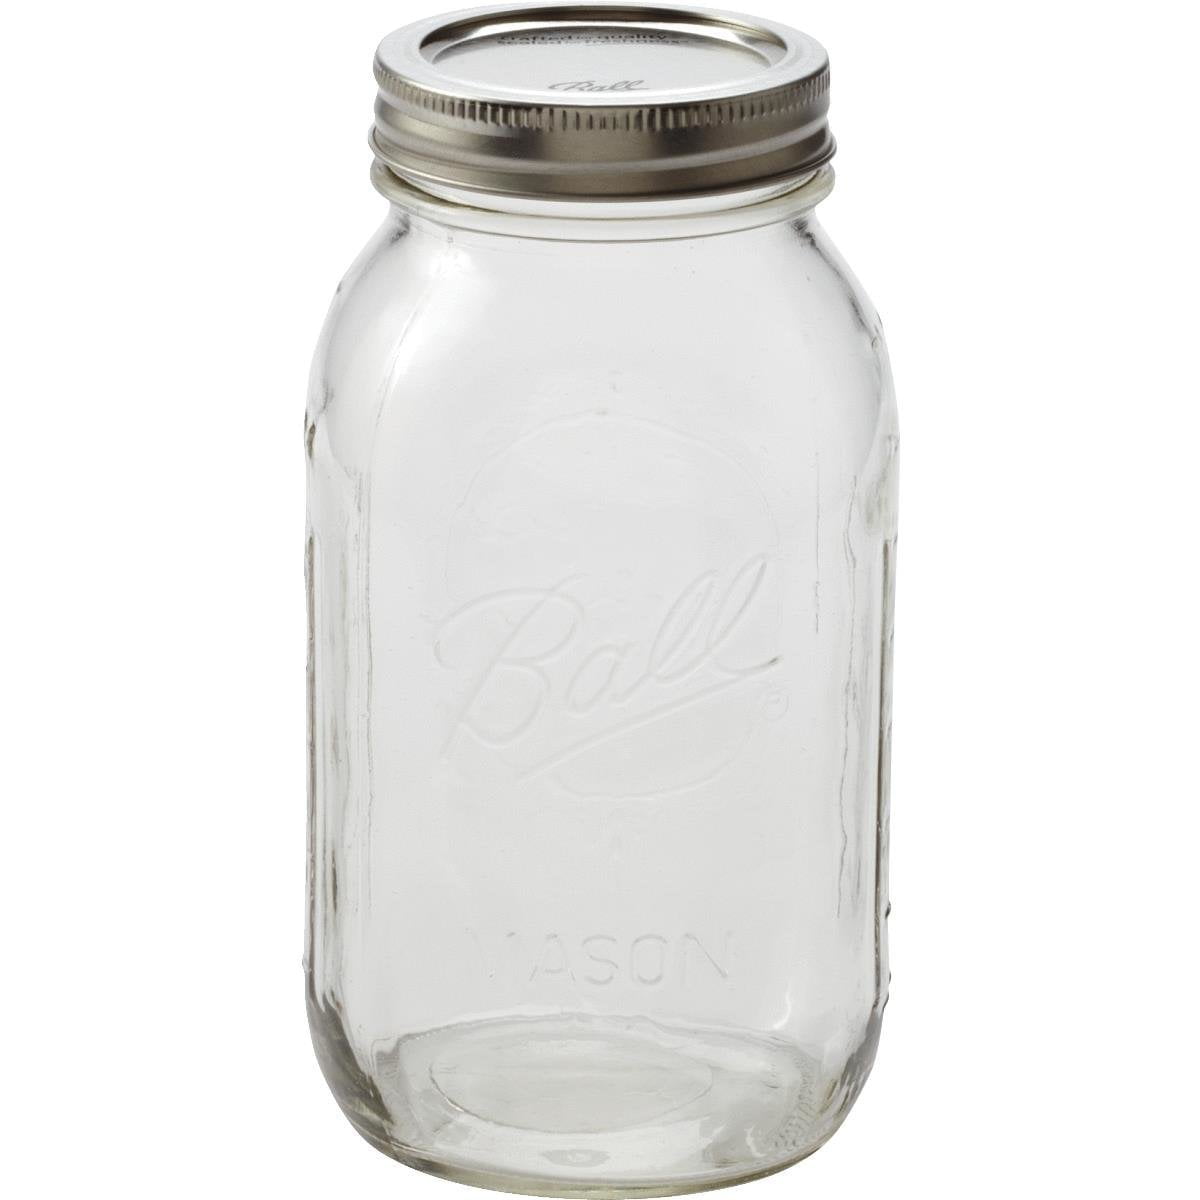 Details about   64oz Wide Mouth Jars With Solid 110mm Metal Lids Pack of 6 